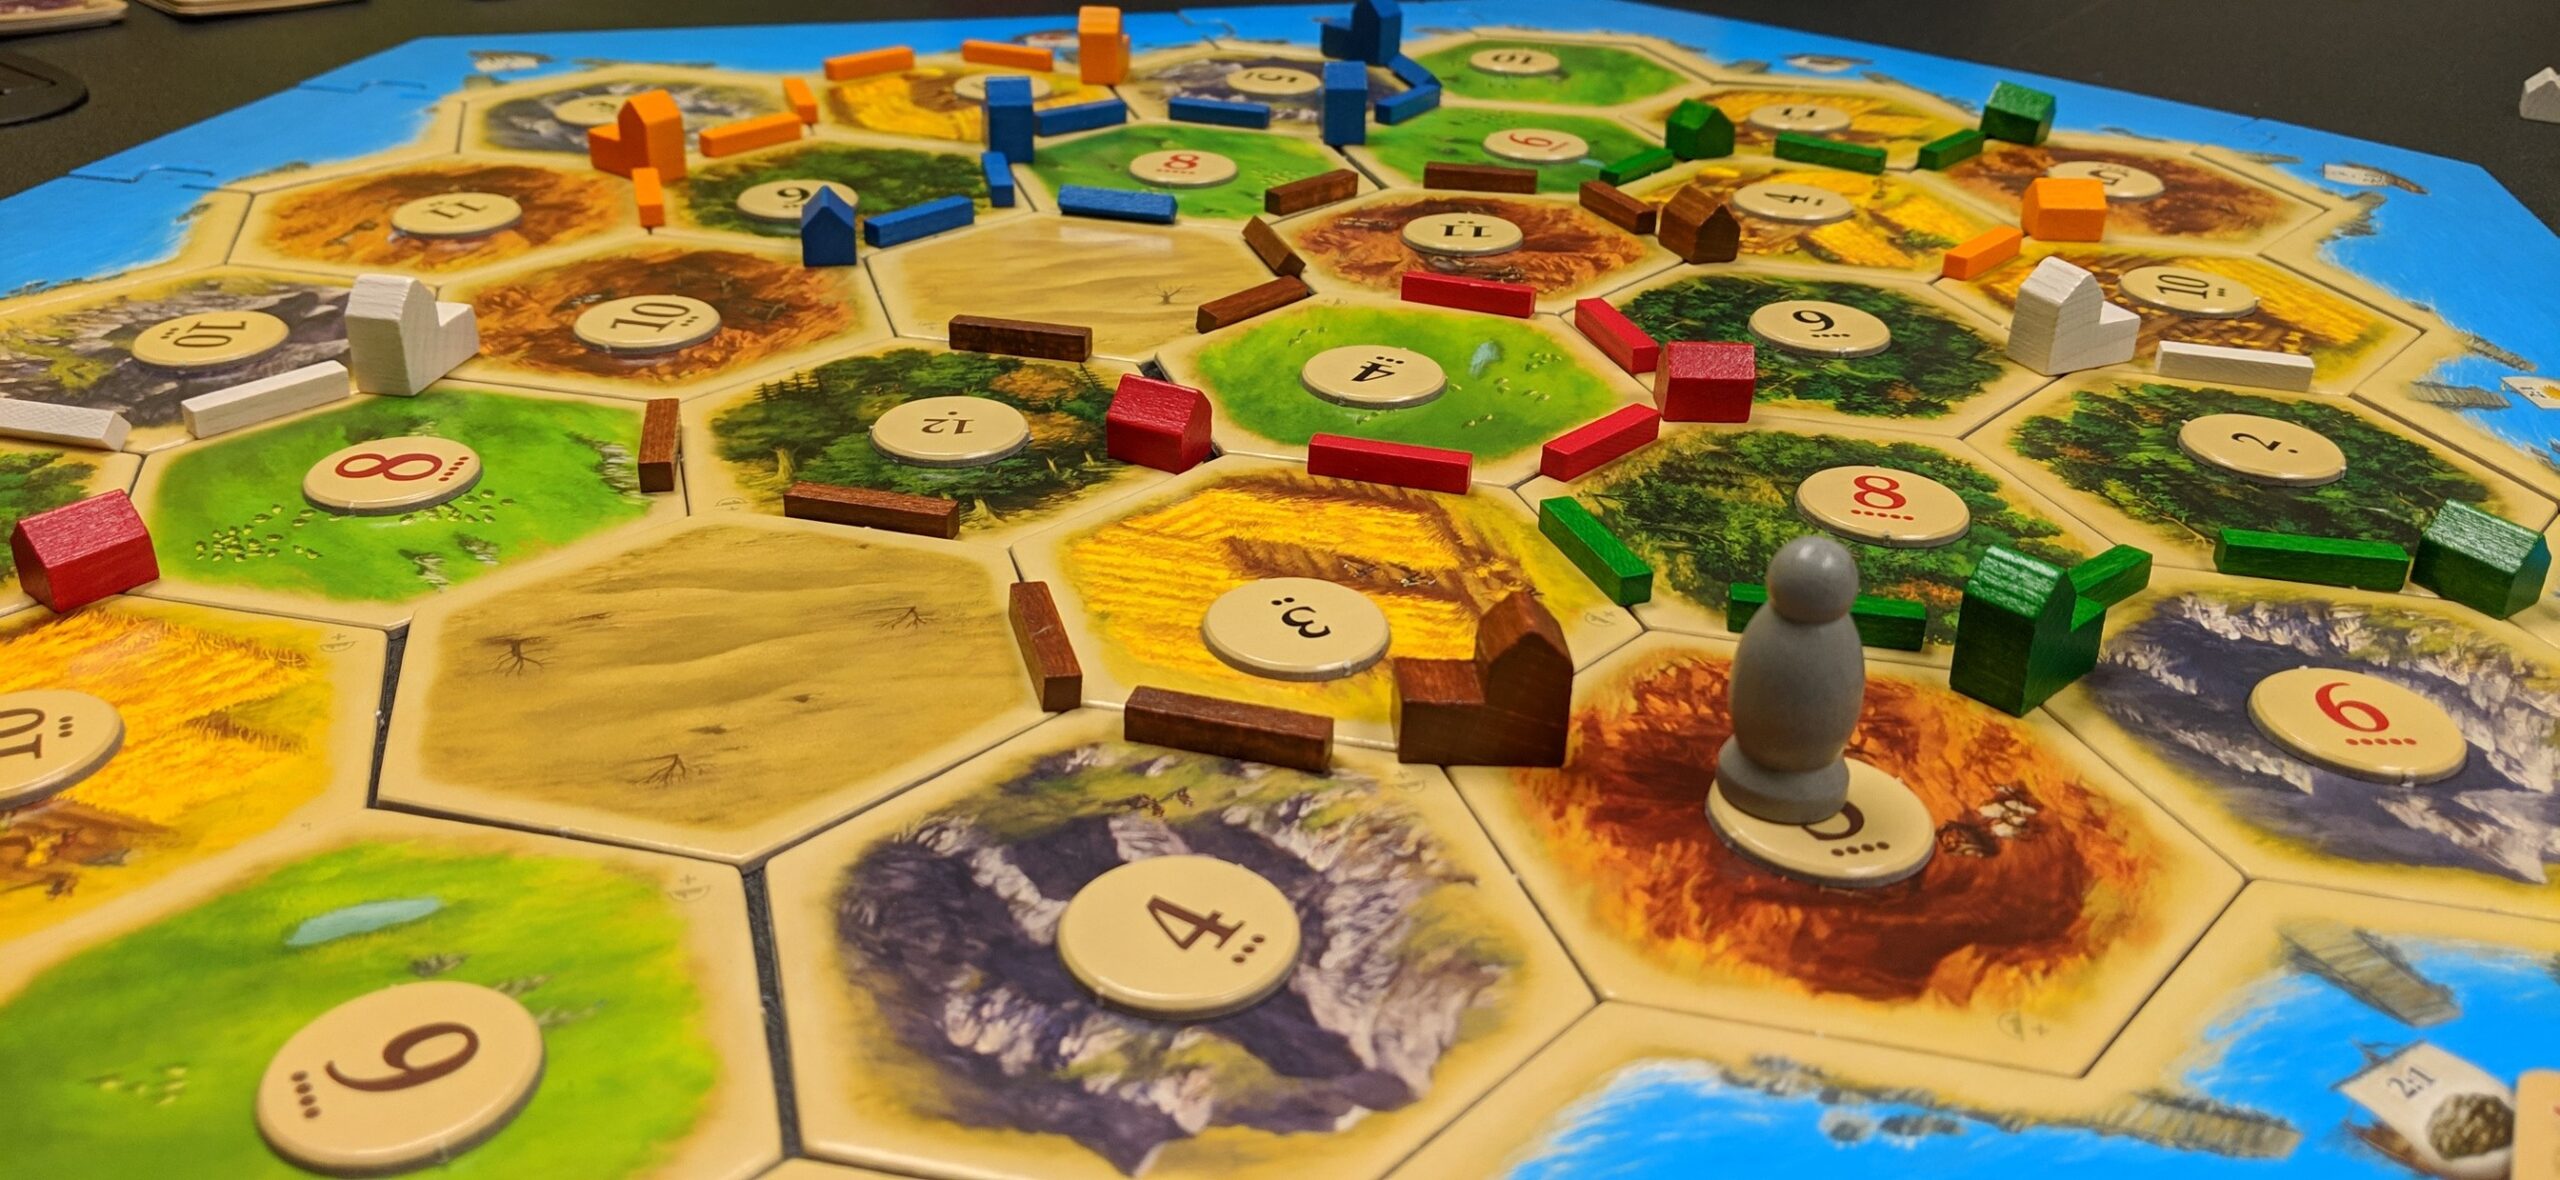 A game board with a game of Settlers of Catan in progress.